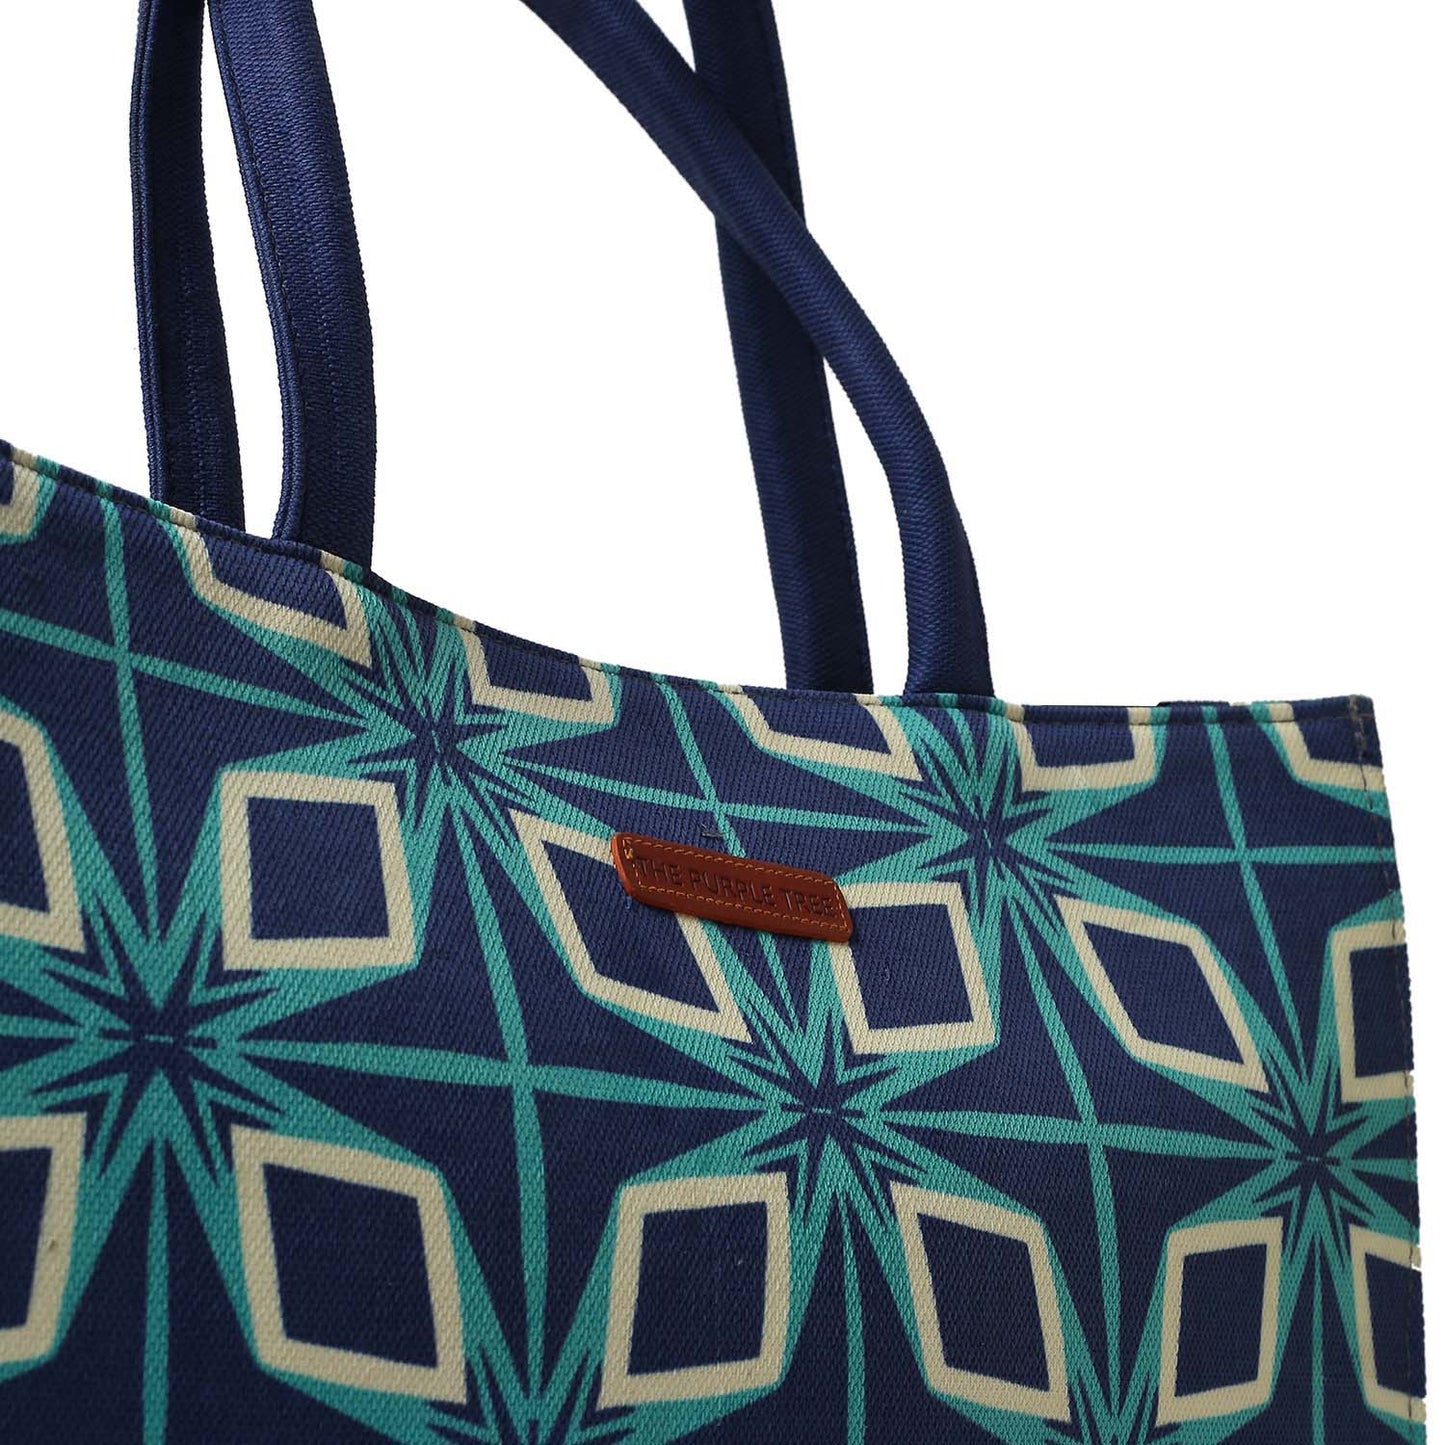  A vibrant tote bag featuring a blue and green pattern, alongside two books.